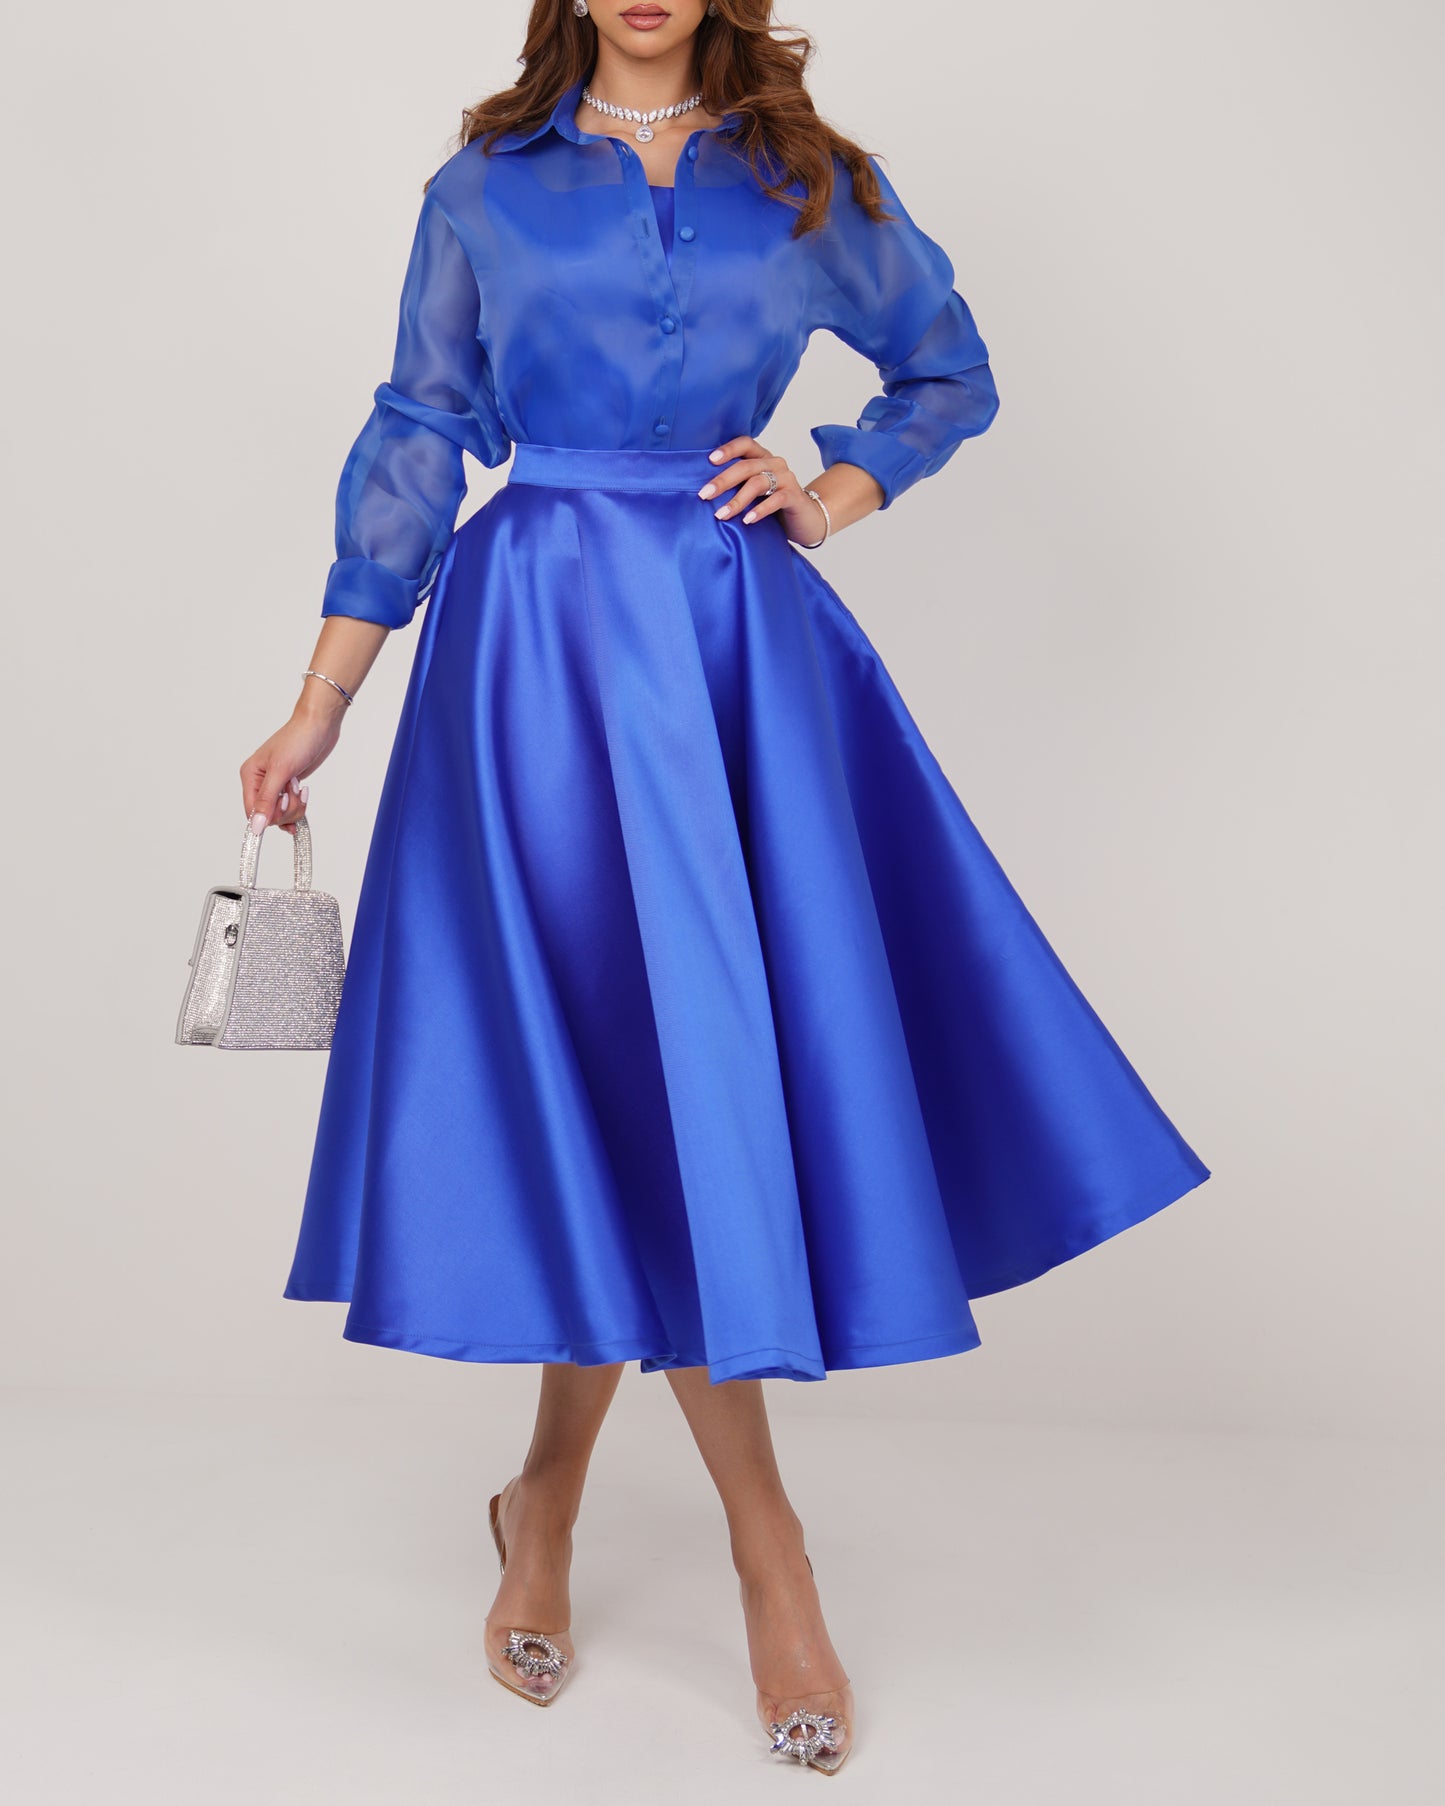 Sheer shirt with satin bodice and flared midi skirt in royal blue